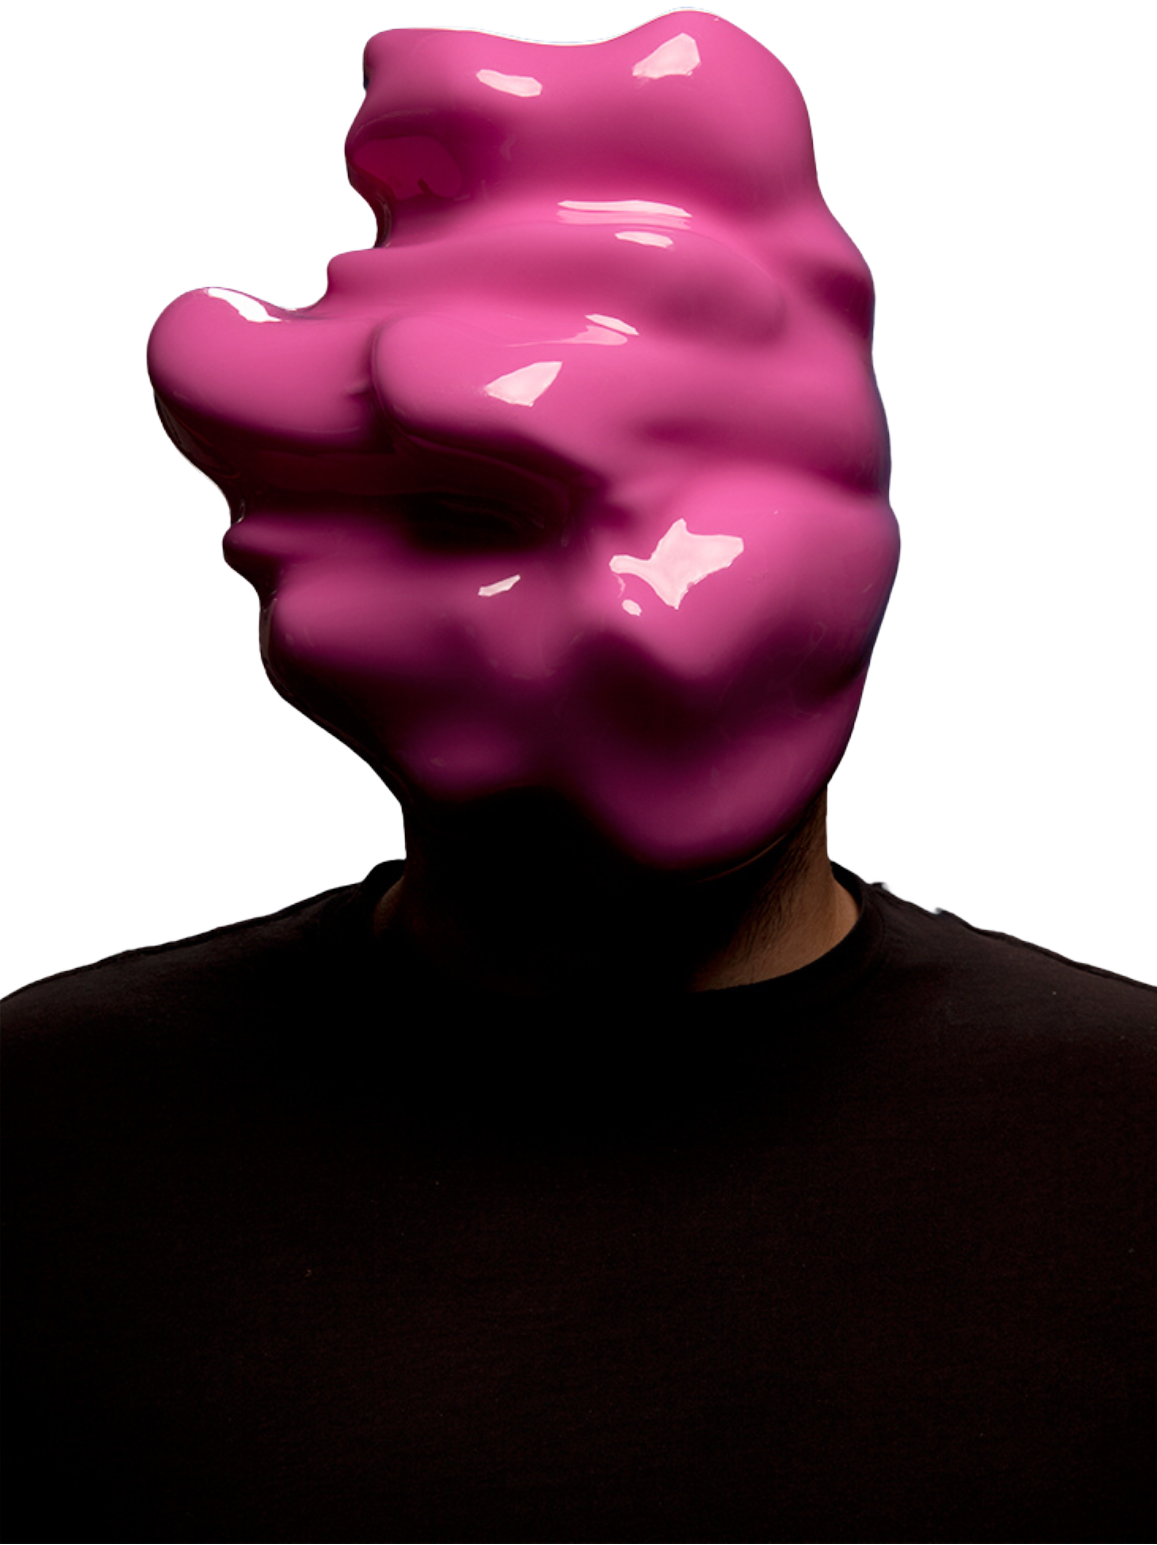 image of a man with his head replaced by a pink blob, Zach Blas's "Fag Face Mask" - an art piece from 2012